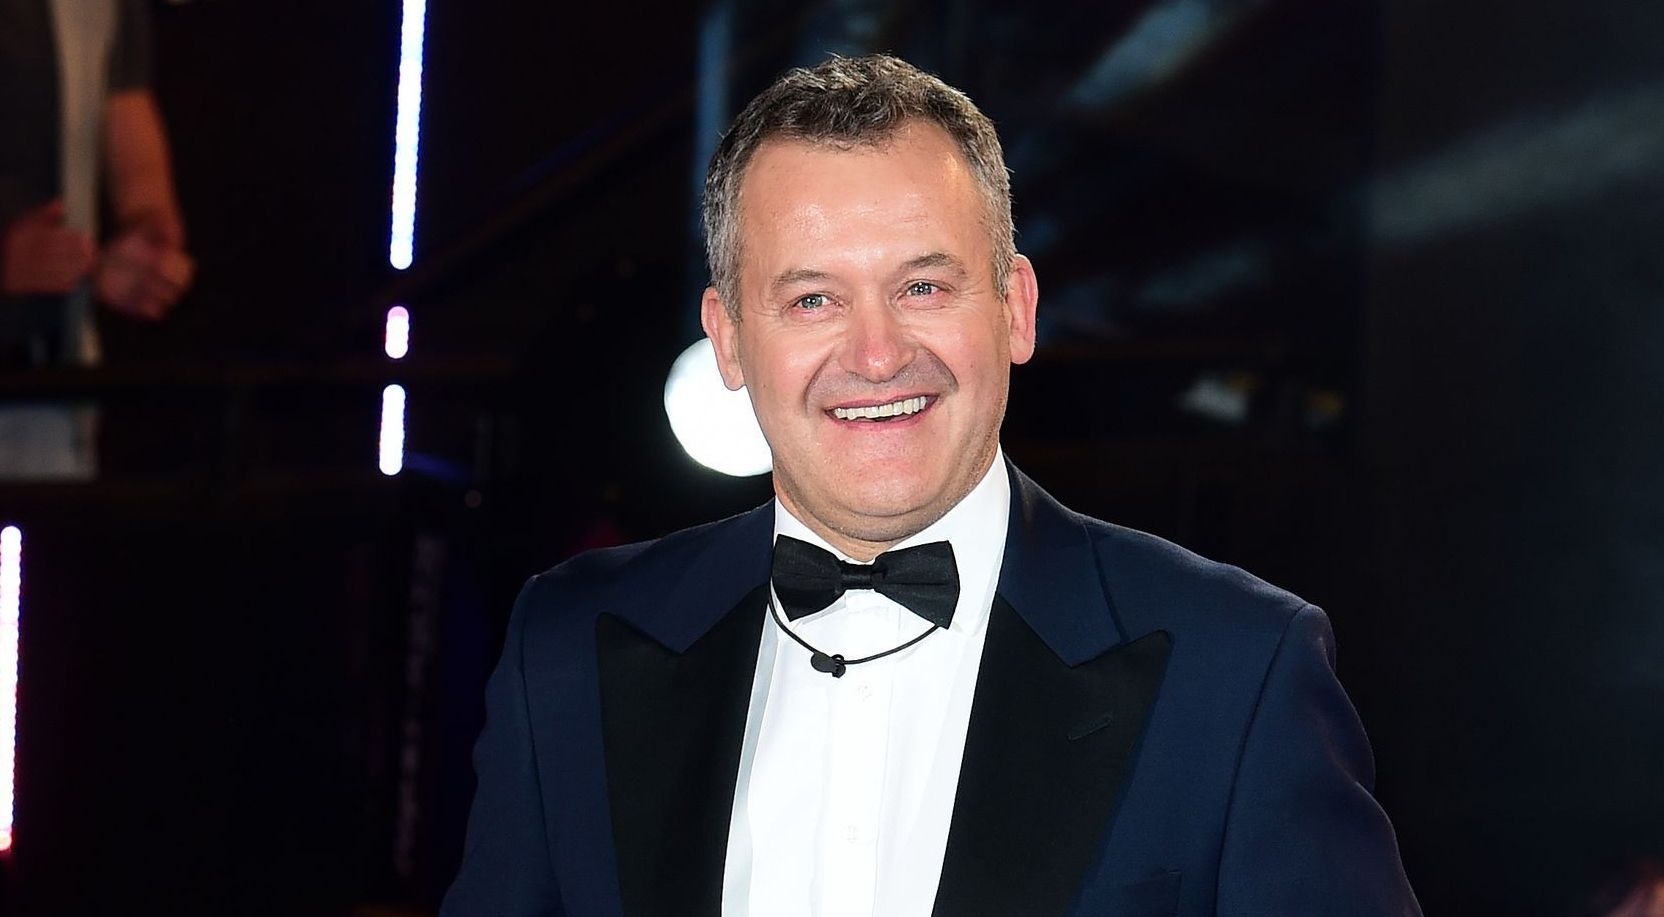 Paul Burrell: Princess Di would have been in the front row at my